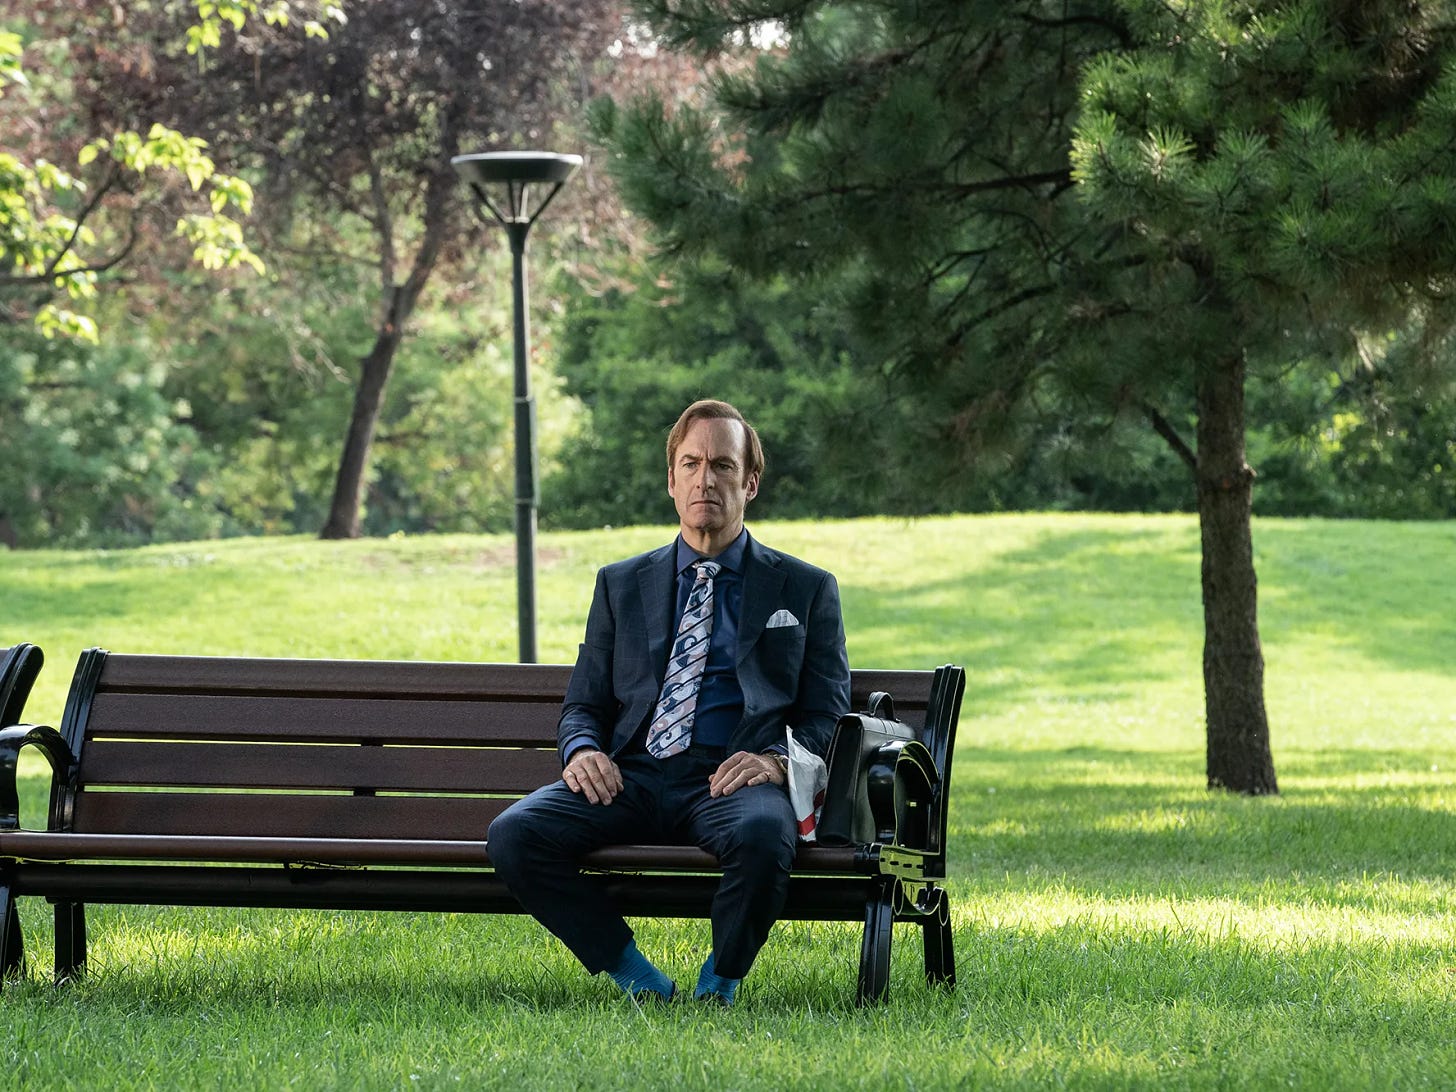 Bob Odenkirk as Jimmy McGill in a suit and tie sitting on a park bench in the middle of a lush green park in the final season of Better Call Saul